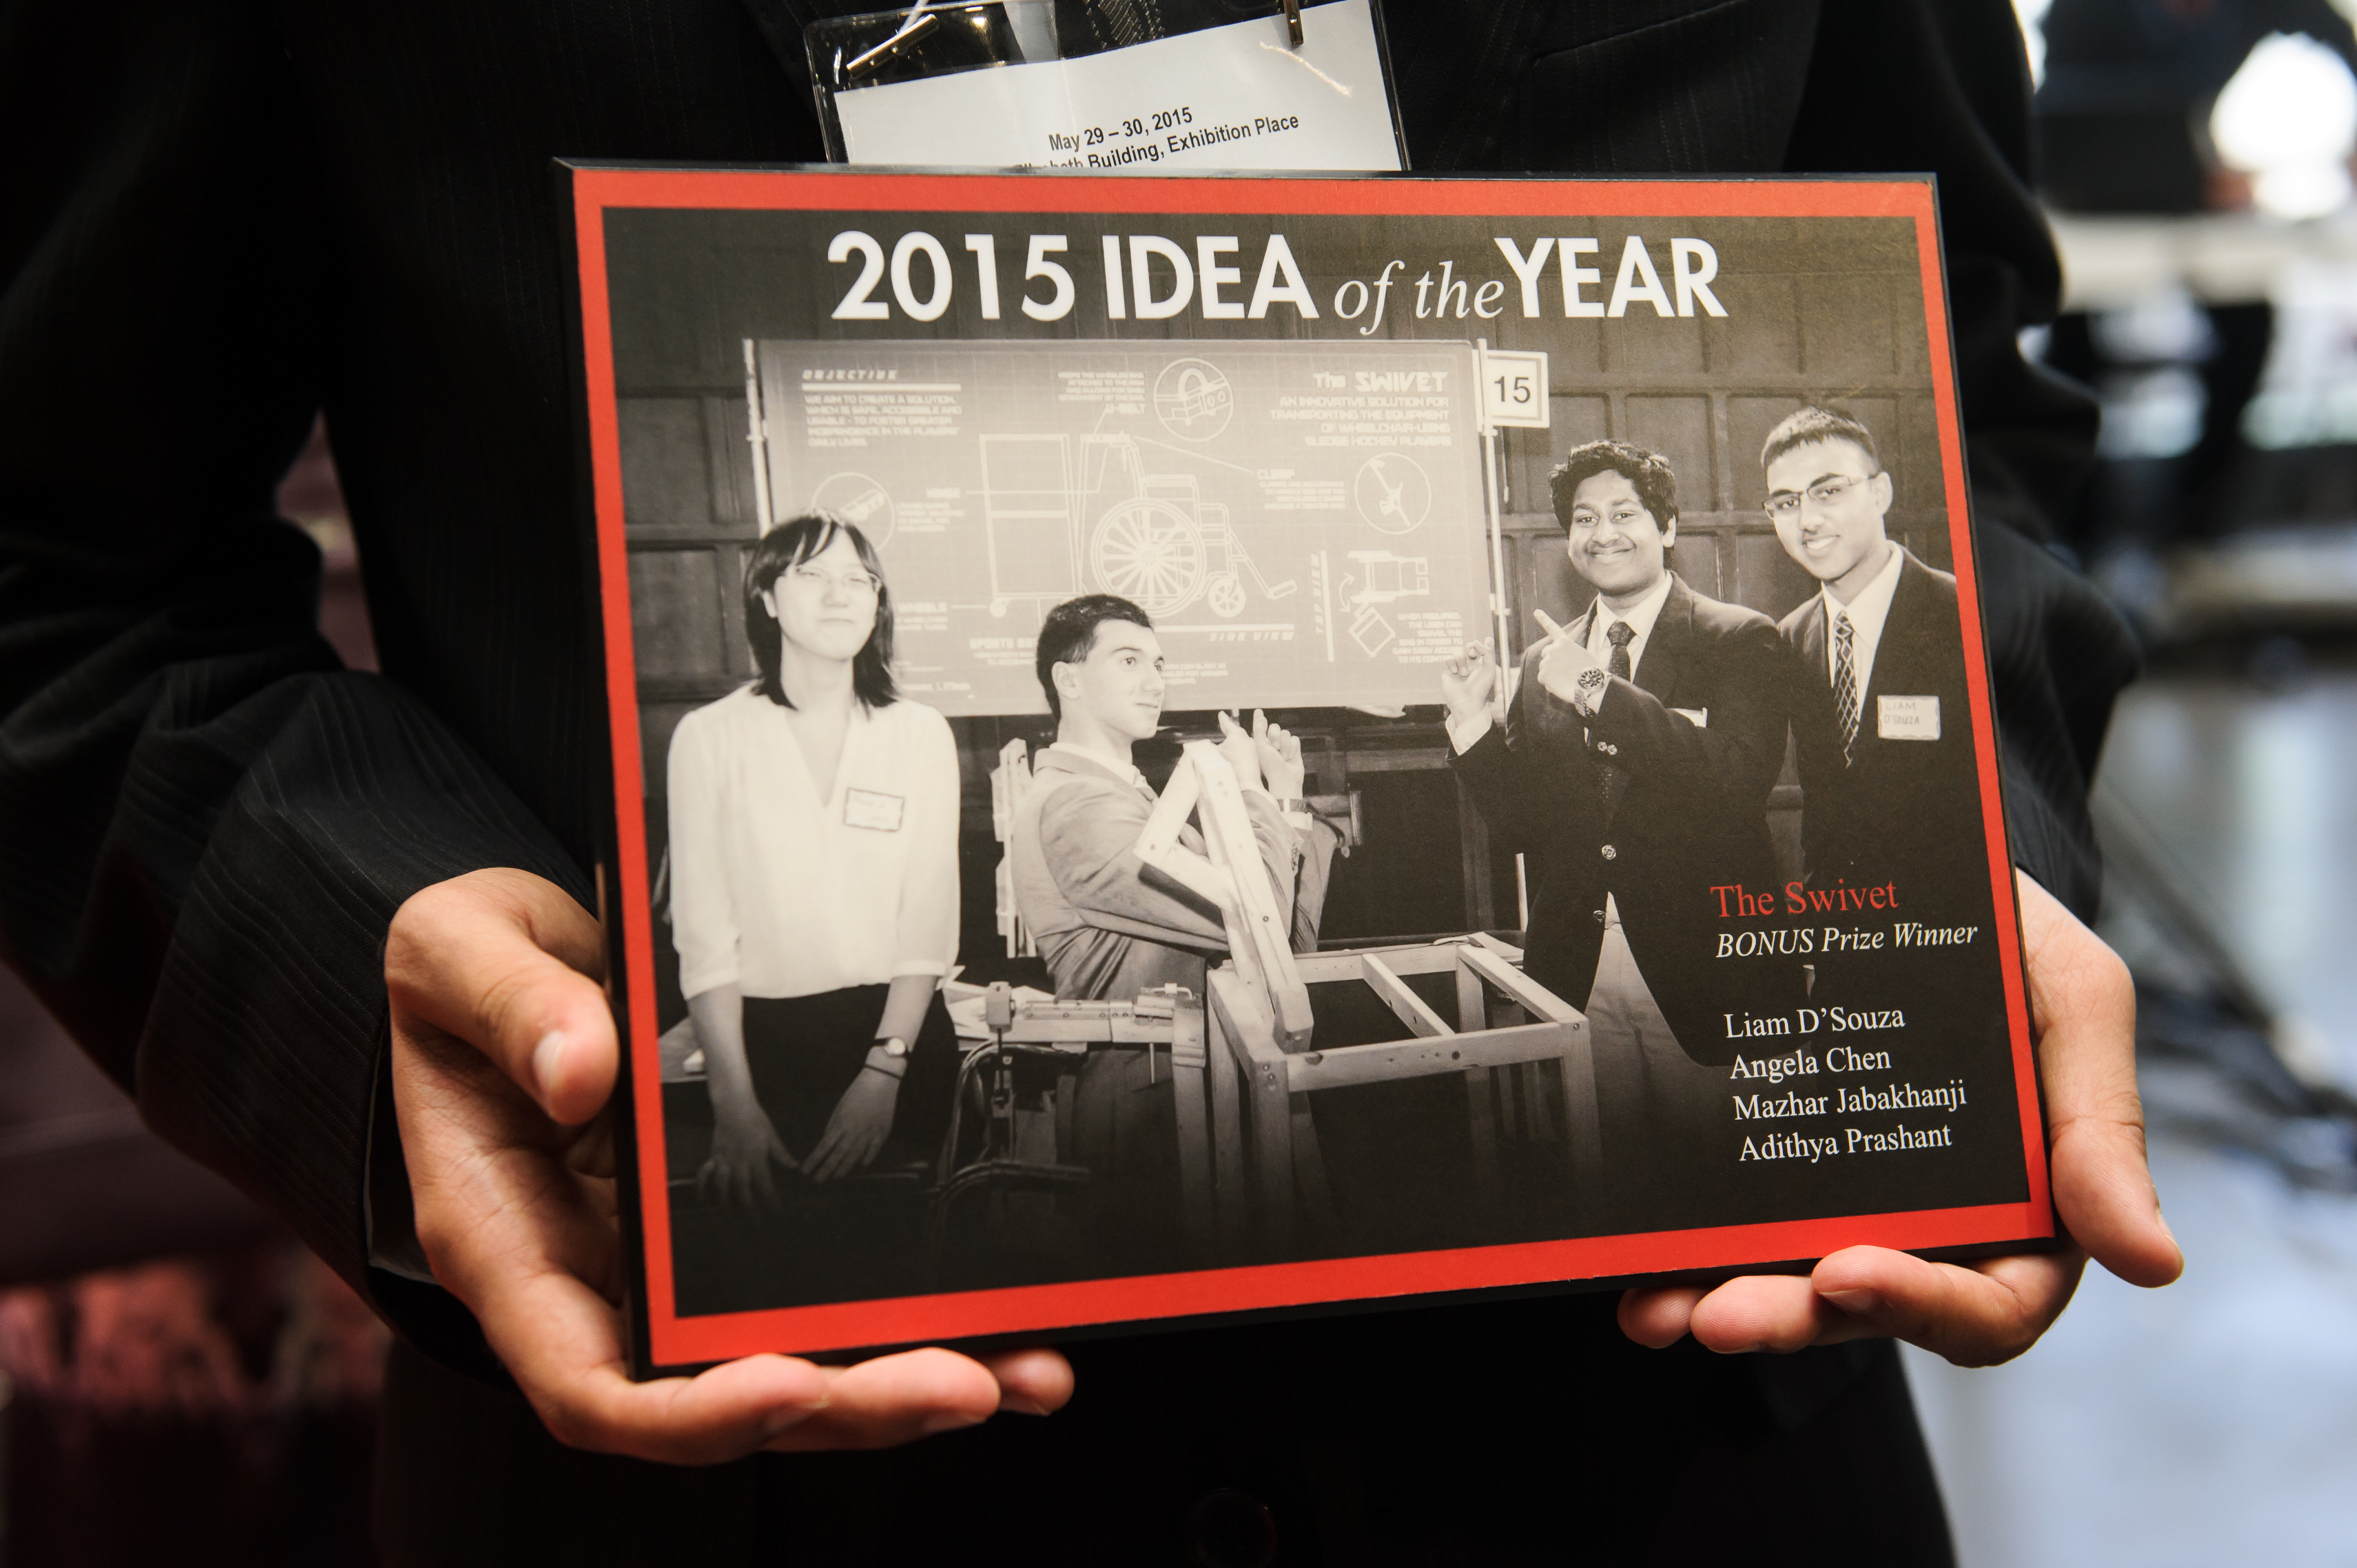 Someone holding the Swivet Team award for 2015 Idea of the Year with the team pointing to their poster and showing their product. Text Reads: 2015 Idea of the Year, The Swivet, Bonus Prize Winner, Liam D'Souza, Angela Chen, Mazhar Jabakhanji, Adithya Prashant